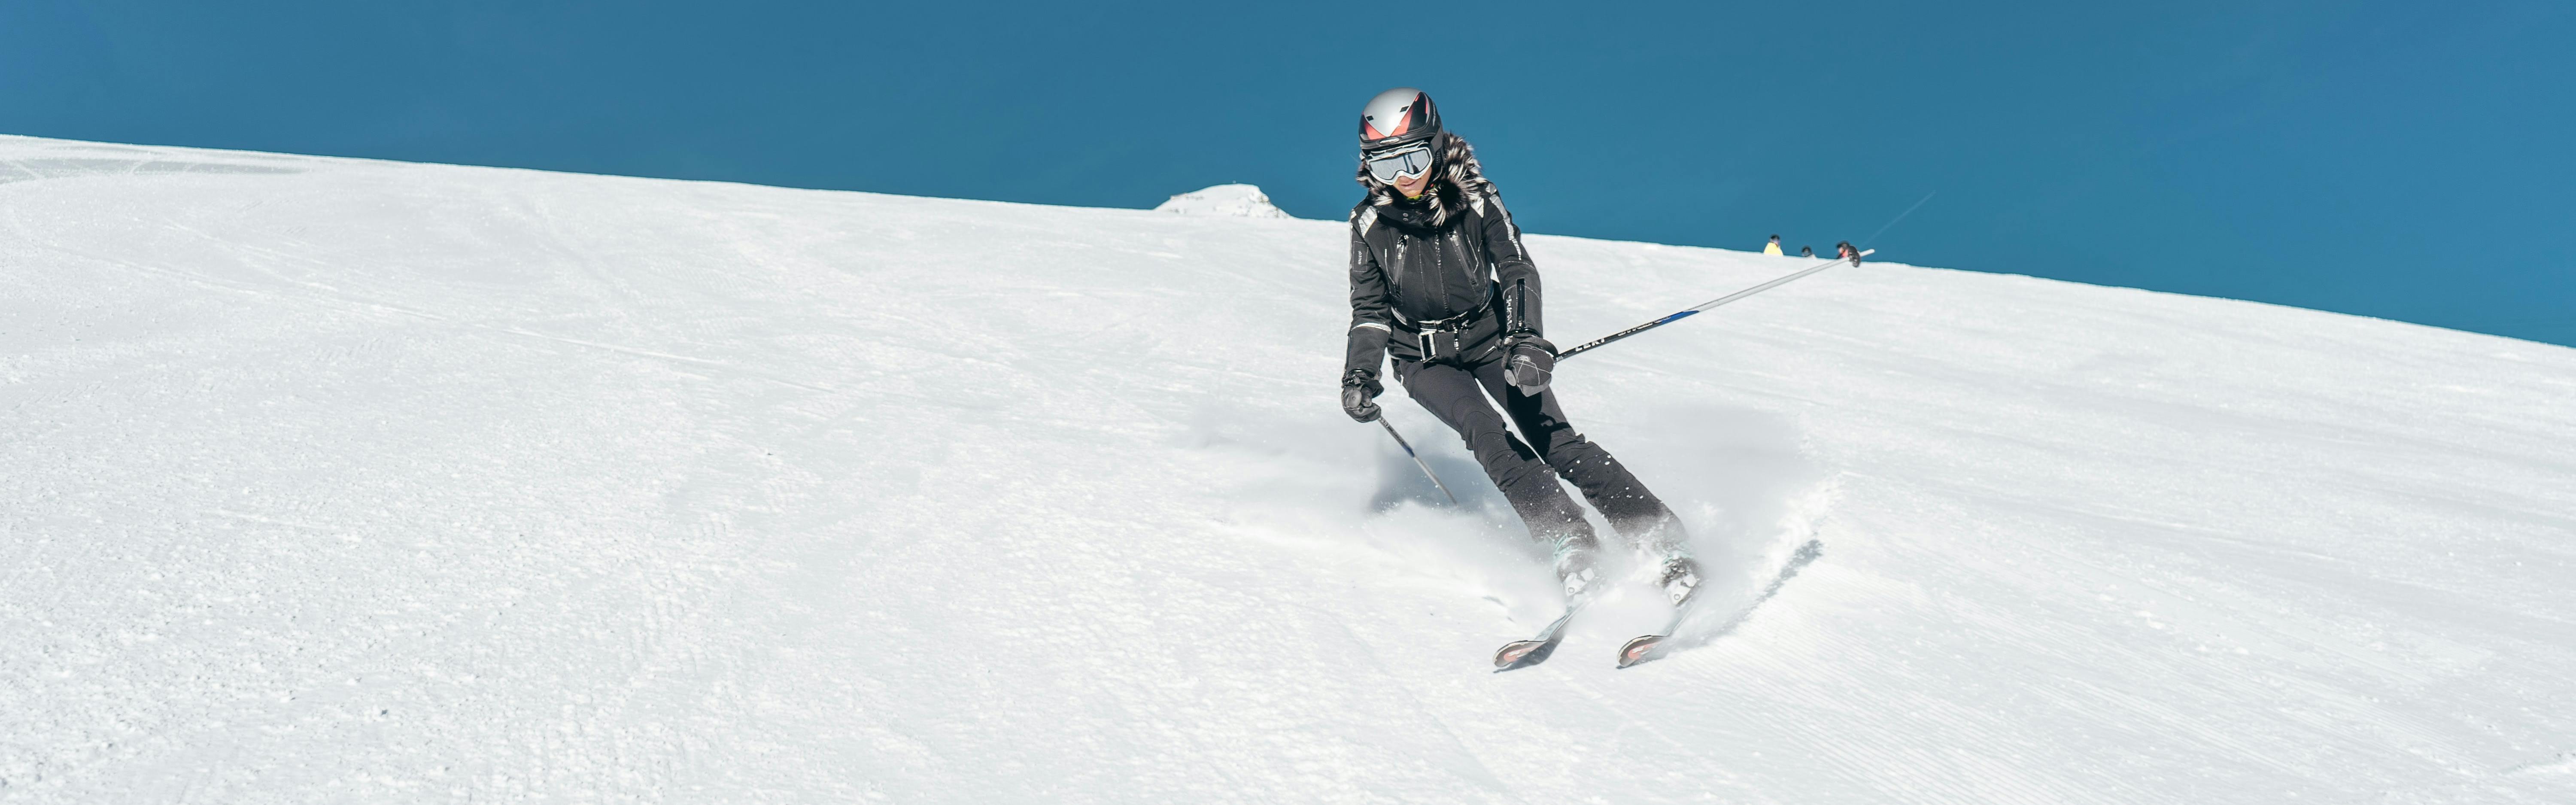 A person wearing black turns while on skis